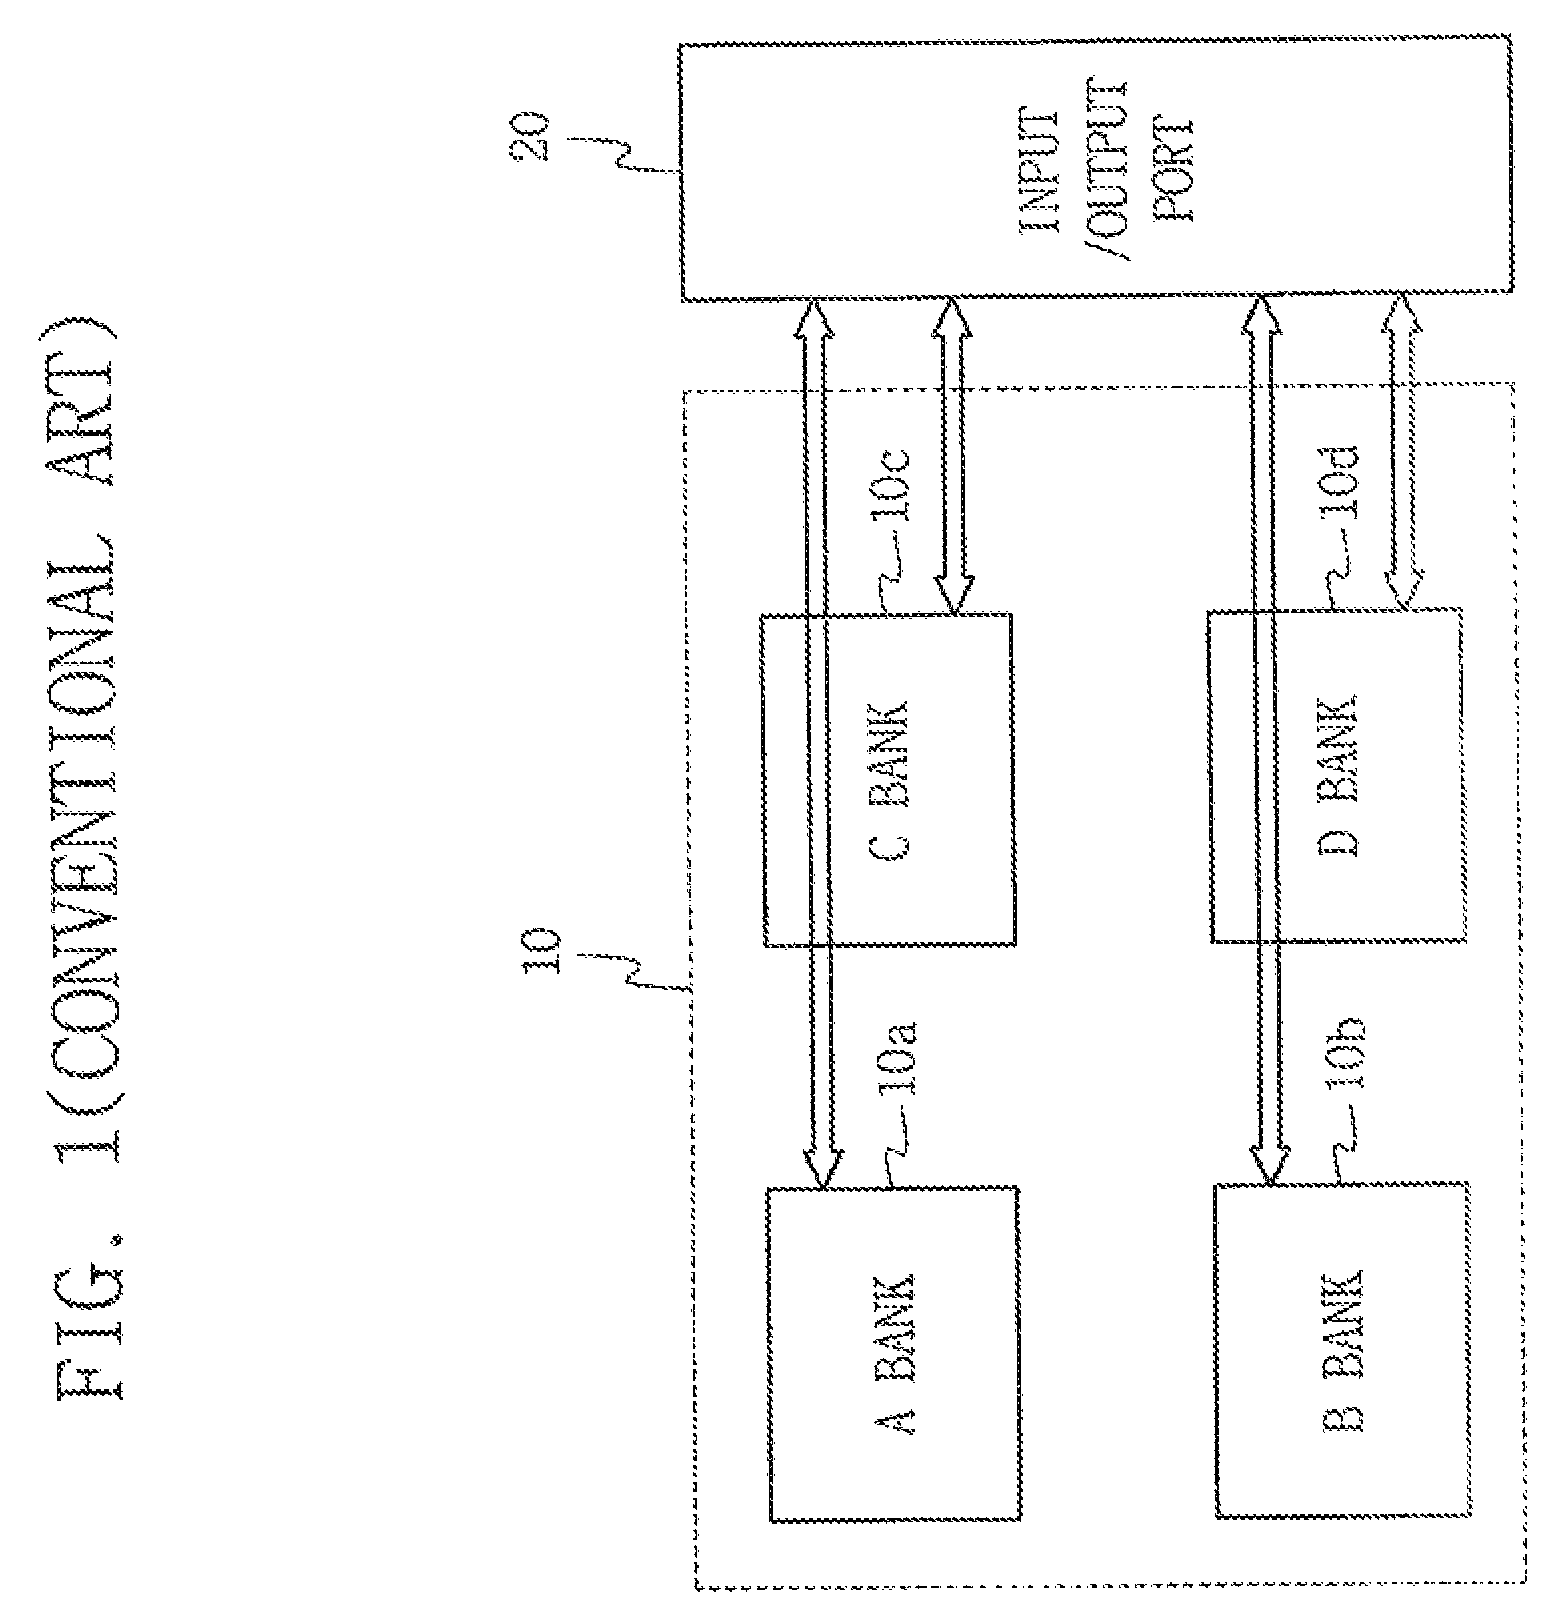 Semiconductor memory device and self-refresh method therefor